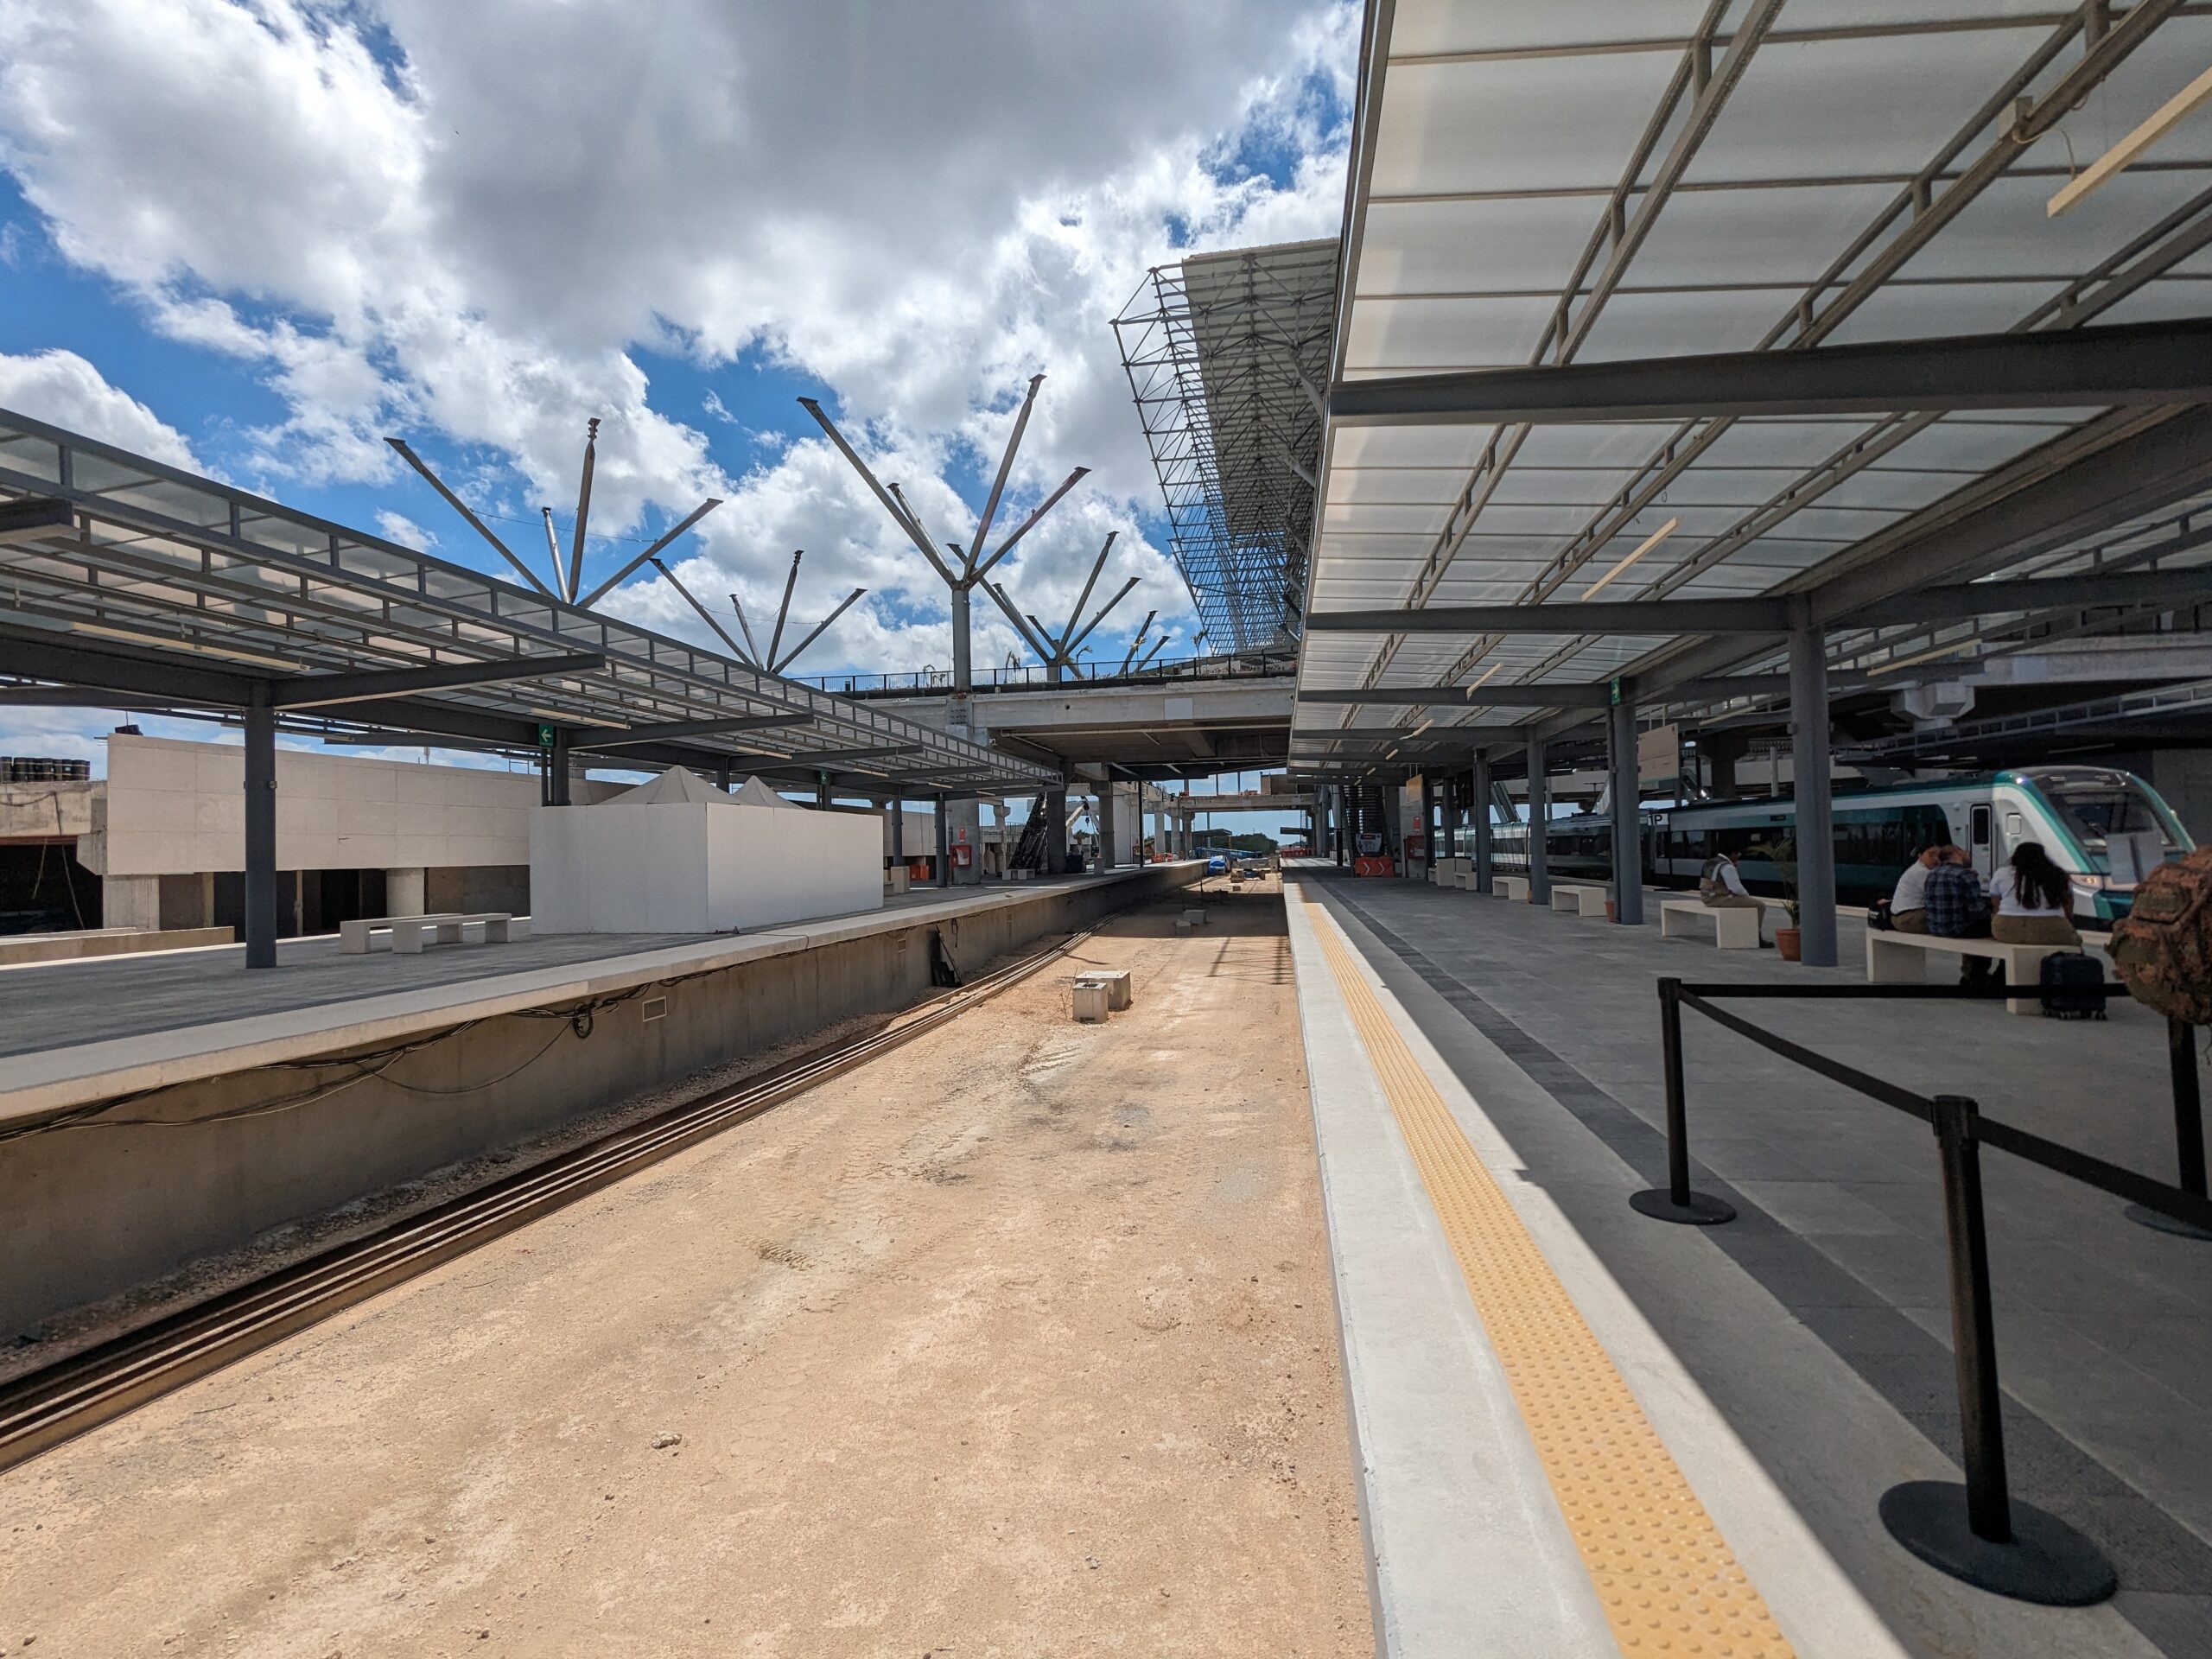 Construction at Cancun Airport Station for the Maya Train